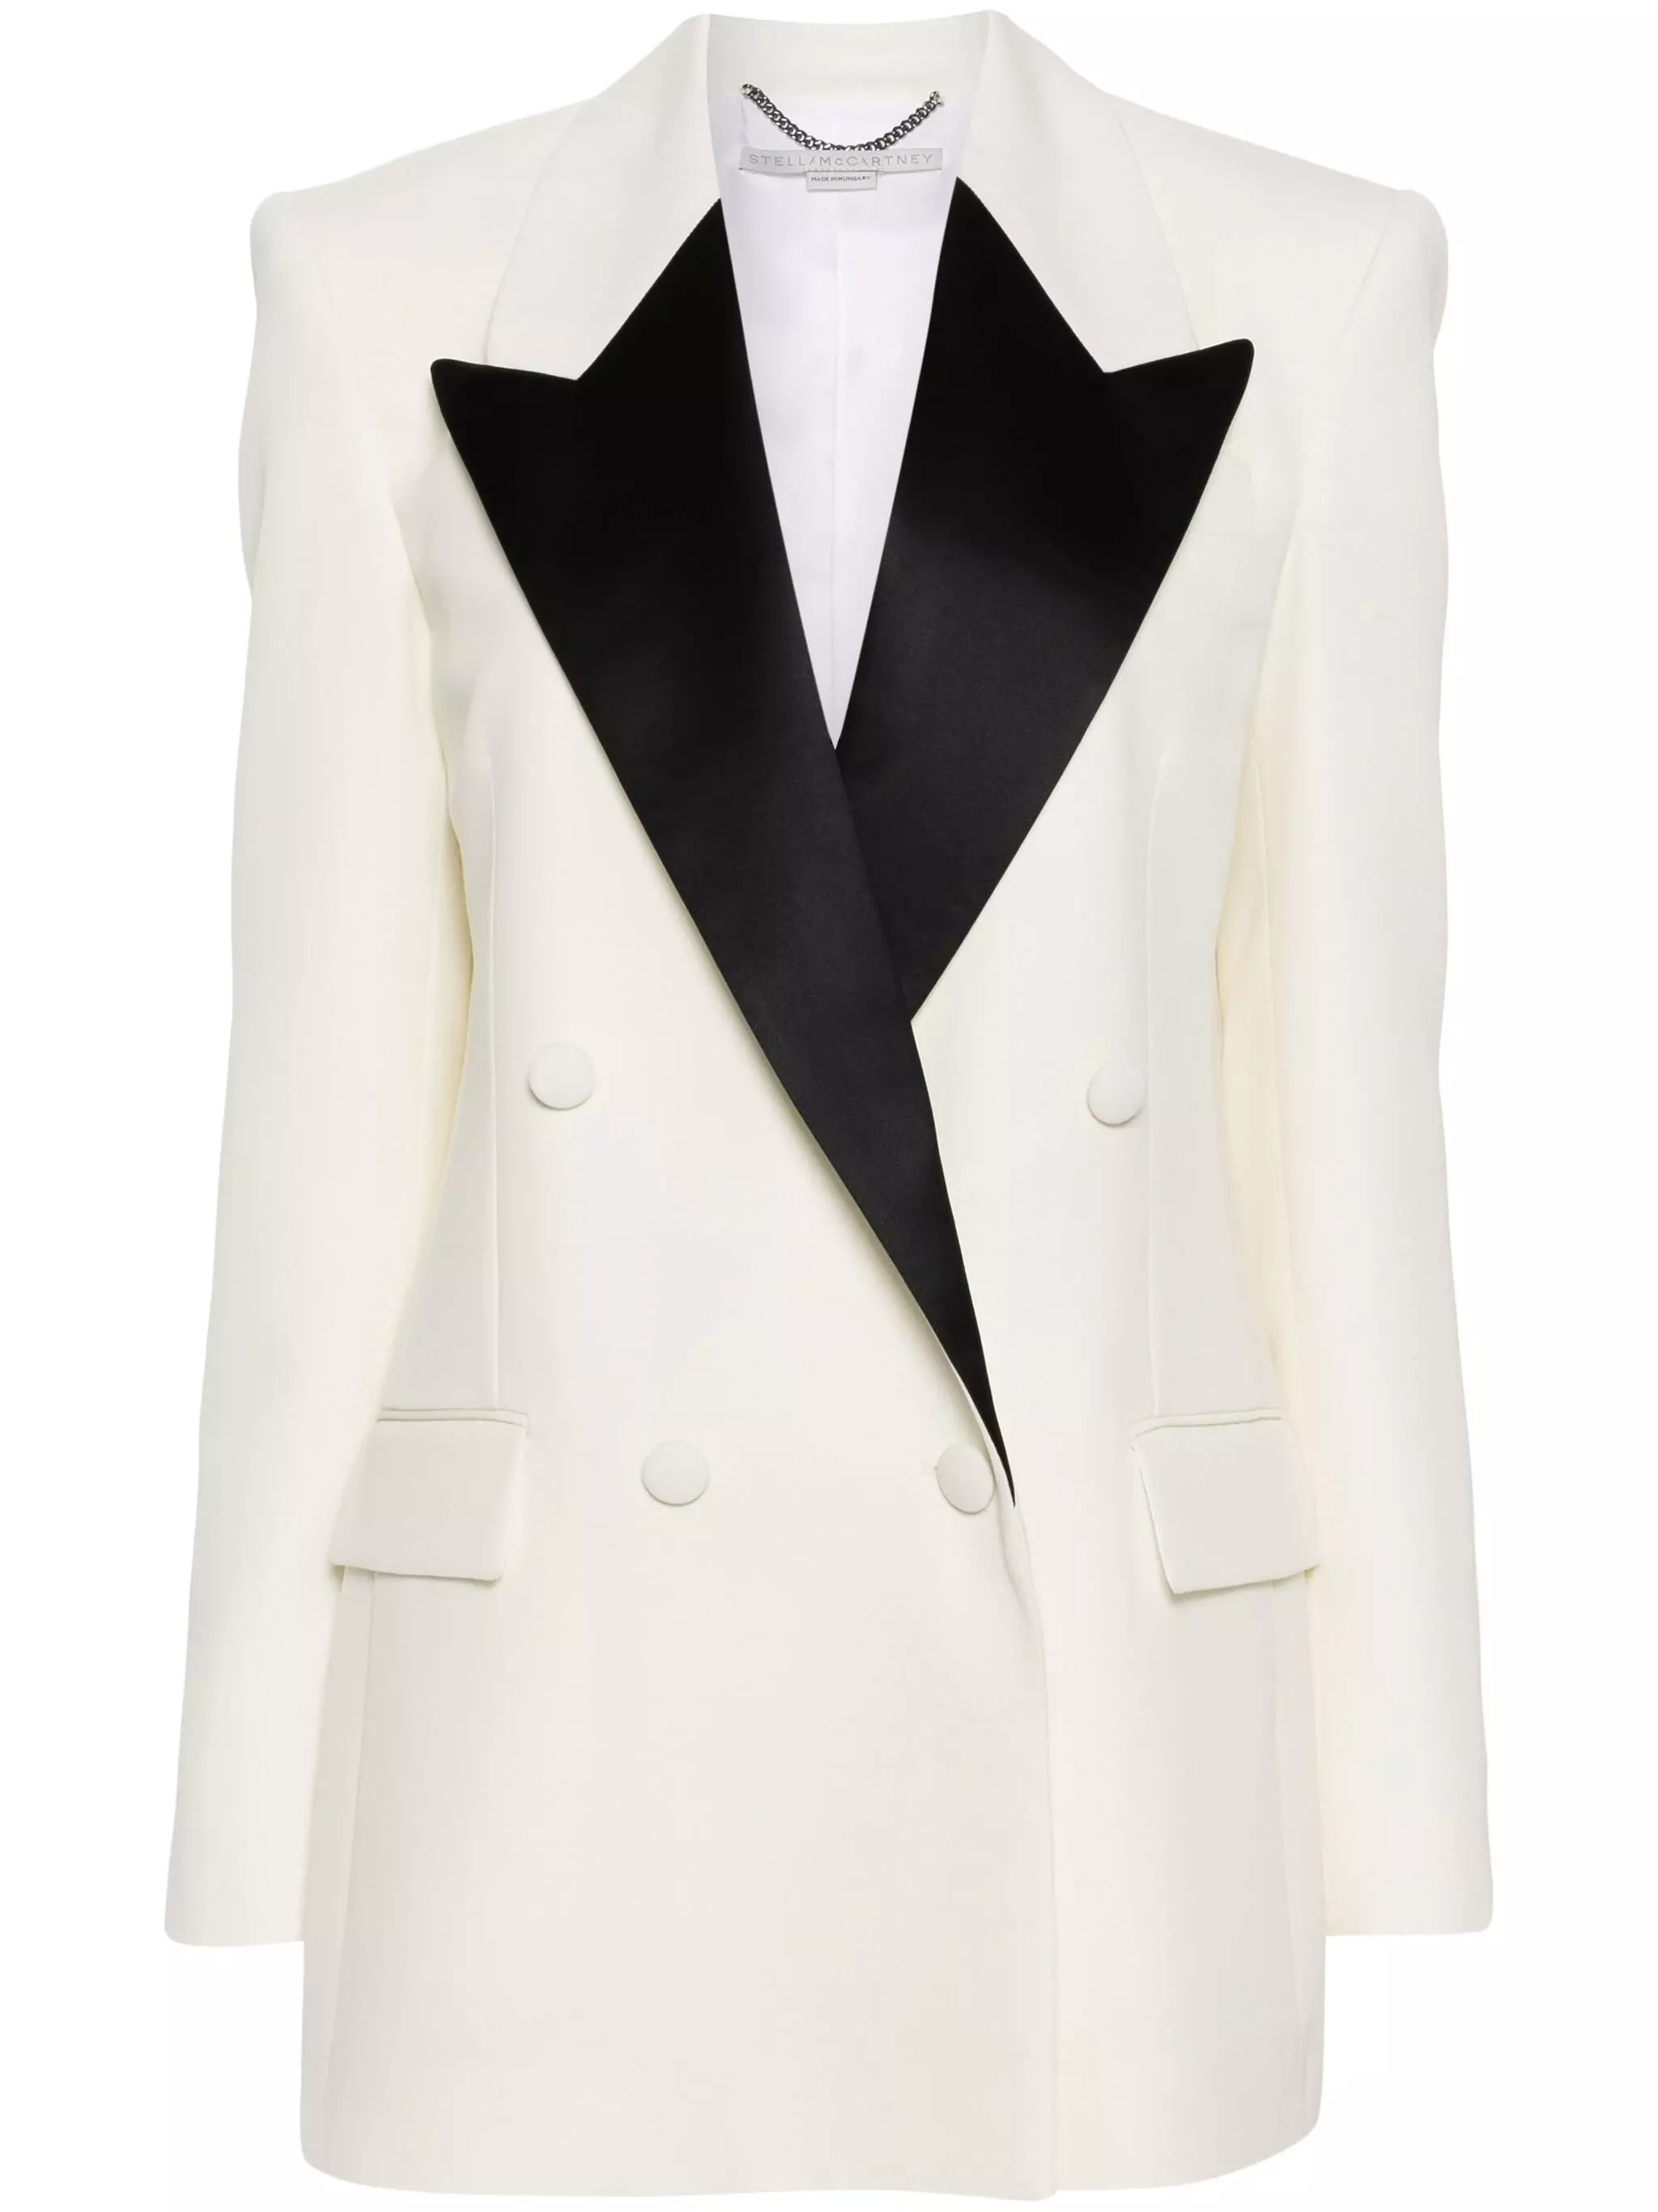 Stella McCartney Contrasting Panel Double Breasted Blazer